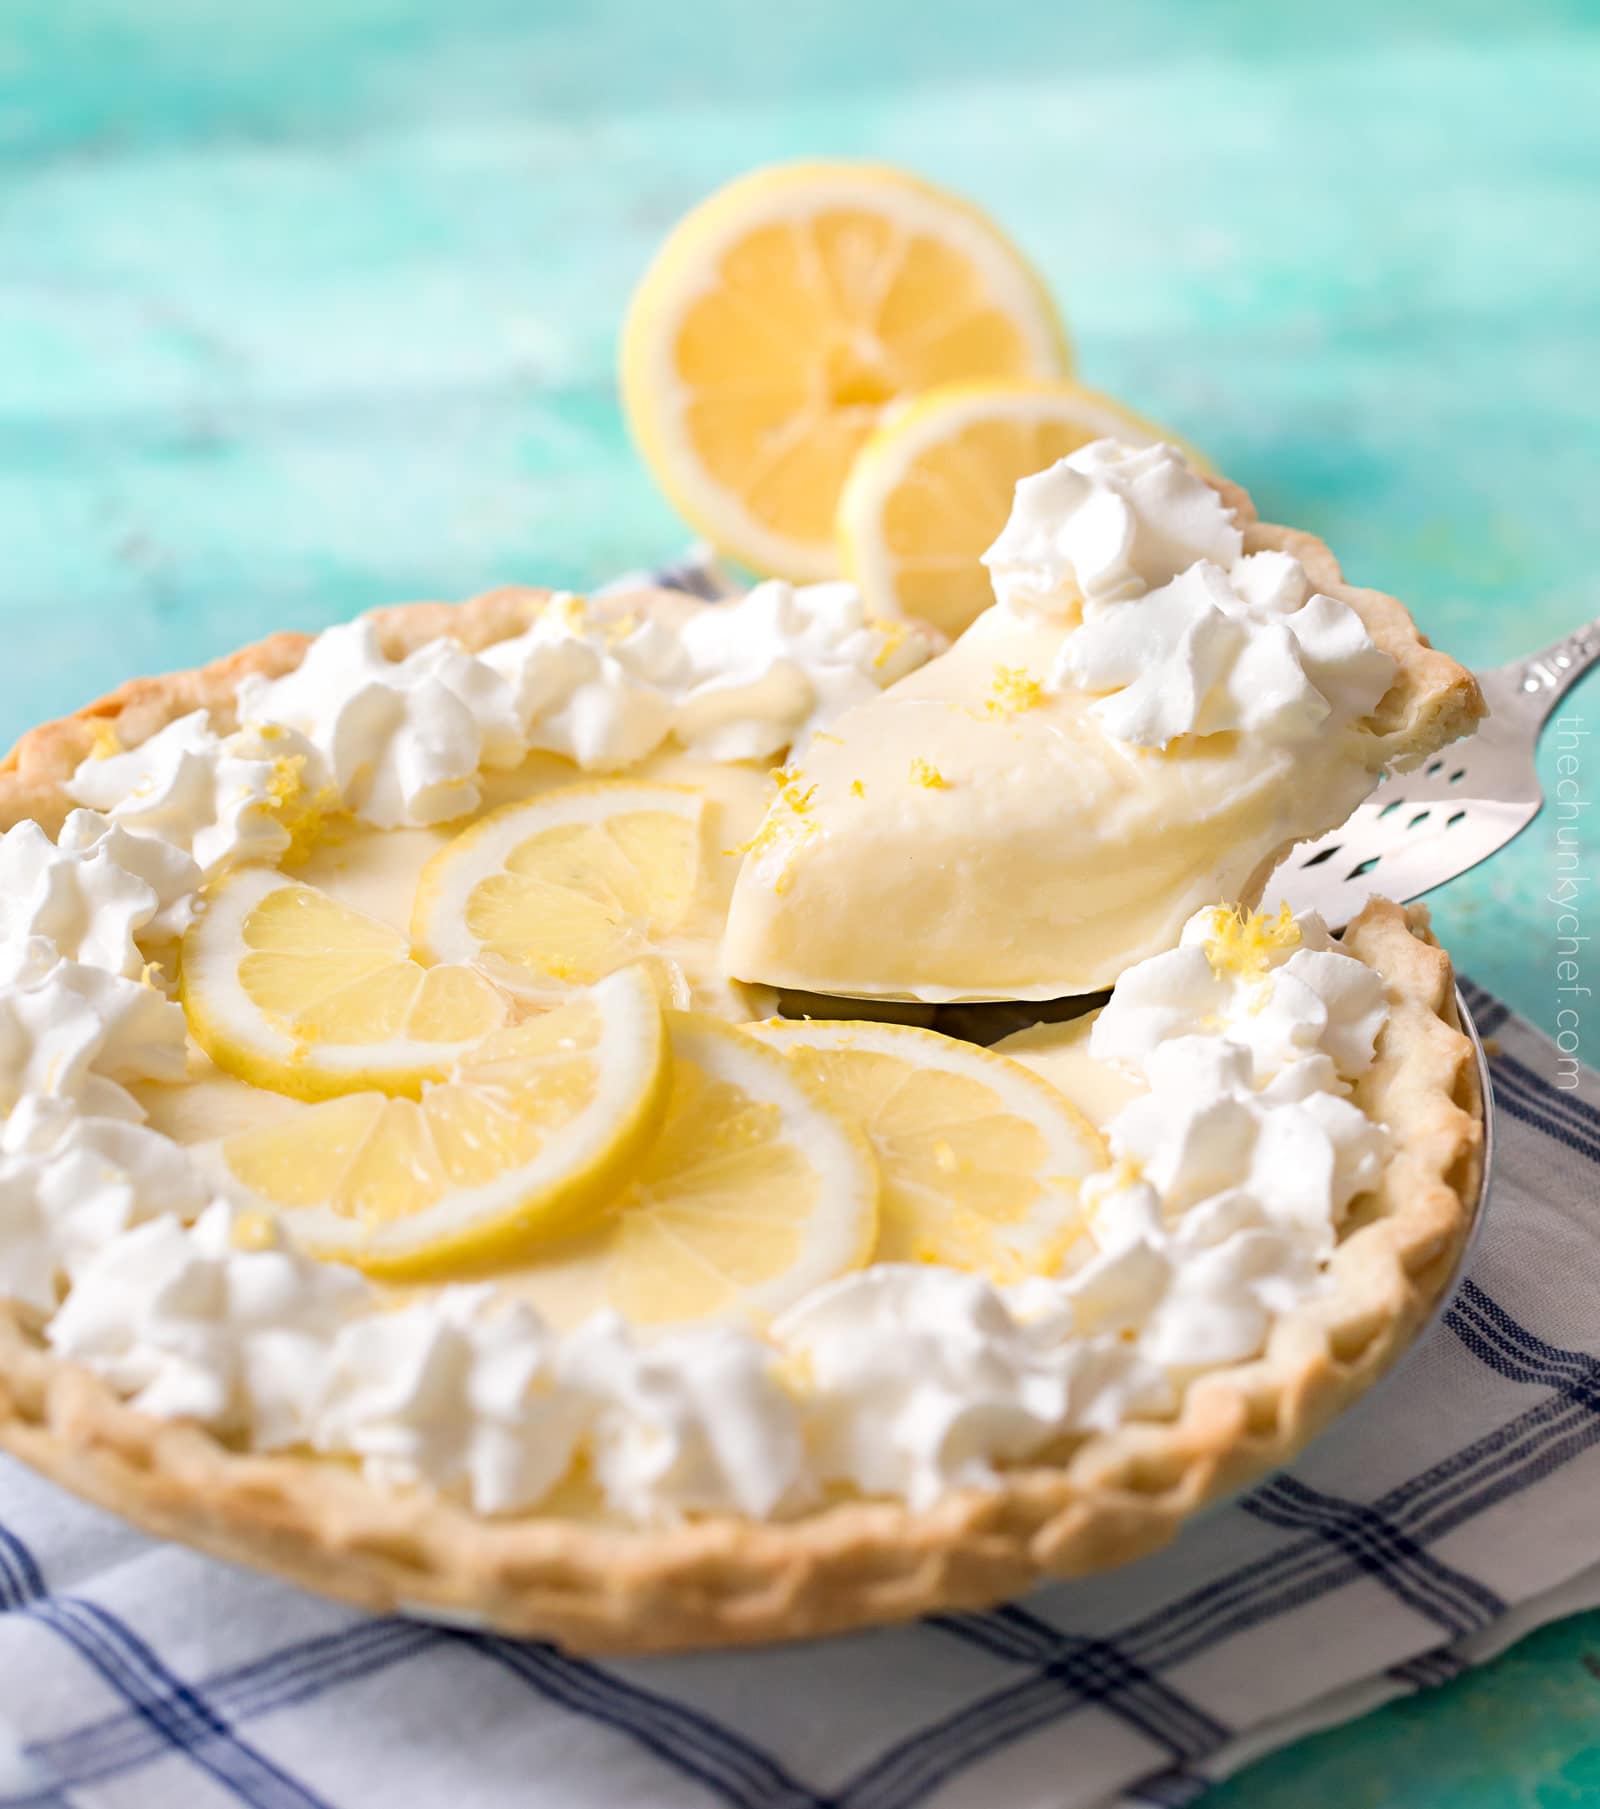 Creamy Sour Cream Lemon Pie | This almost no bake pie is cool, creamy, rich, and bursting with summer lemon flavors. The sour cream gives this dessert a delicious tang! | http://thechunkychef.com